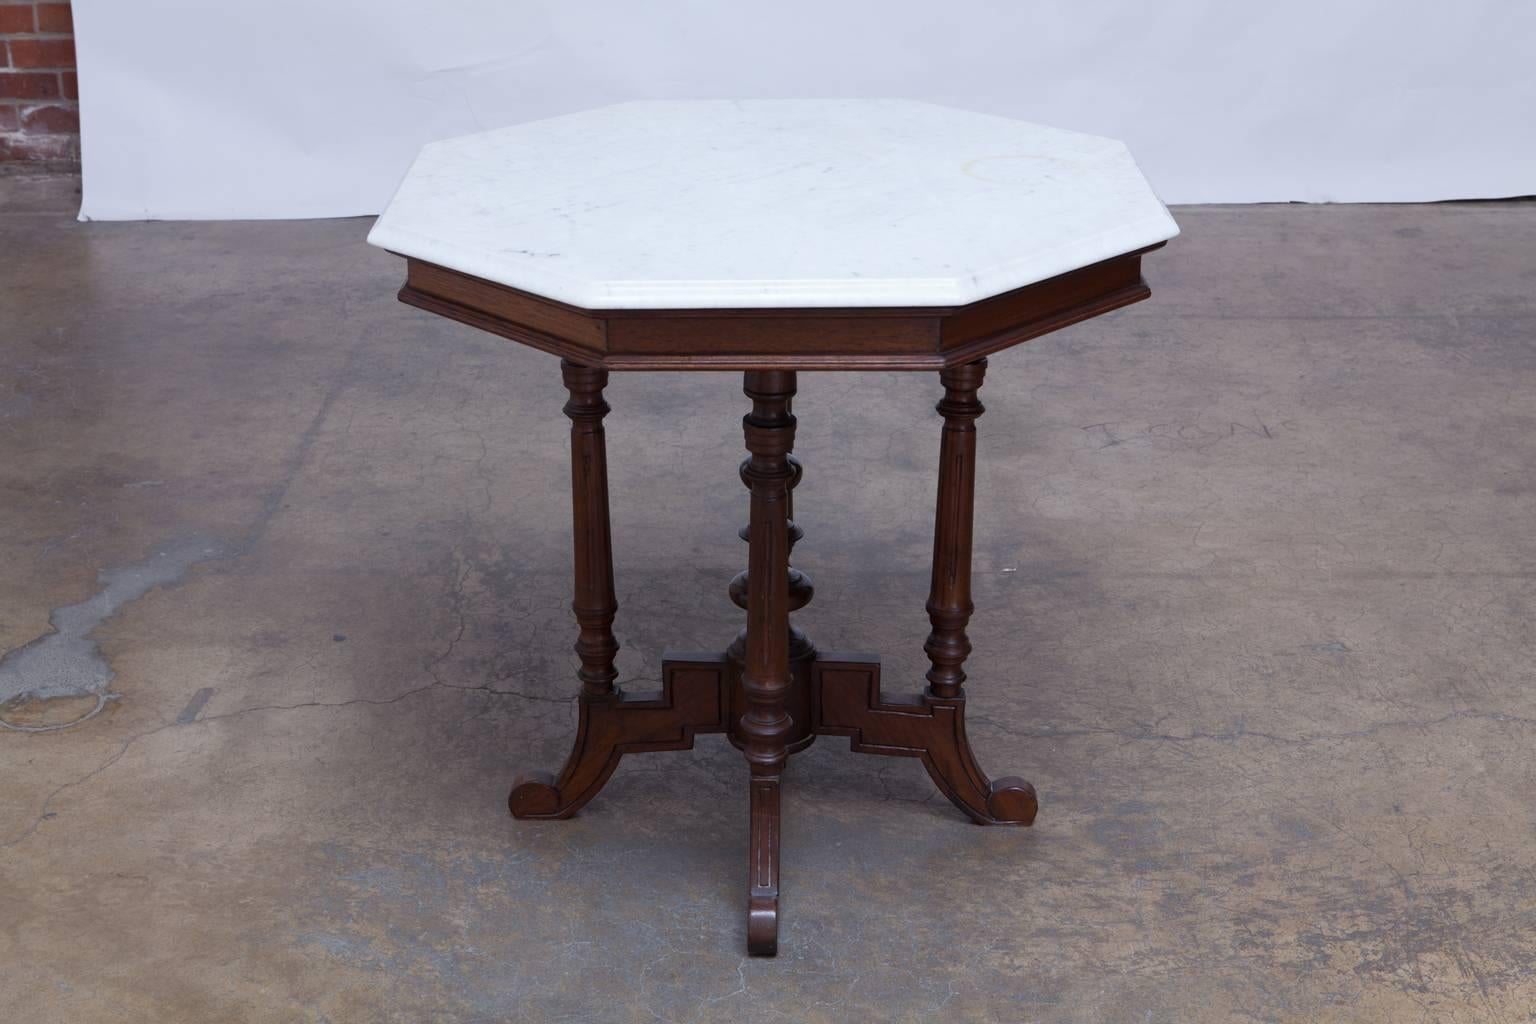 Distinctive marble-top octagonal center table featuring a well-carved mahogany base with geometric feet, turned legs, and stacked sphere centerpiece. Beautiful conforming octagonal white marble-top with an ogee edge profile.